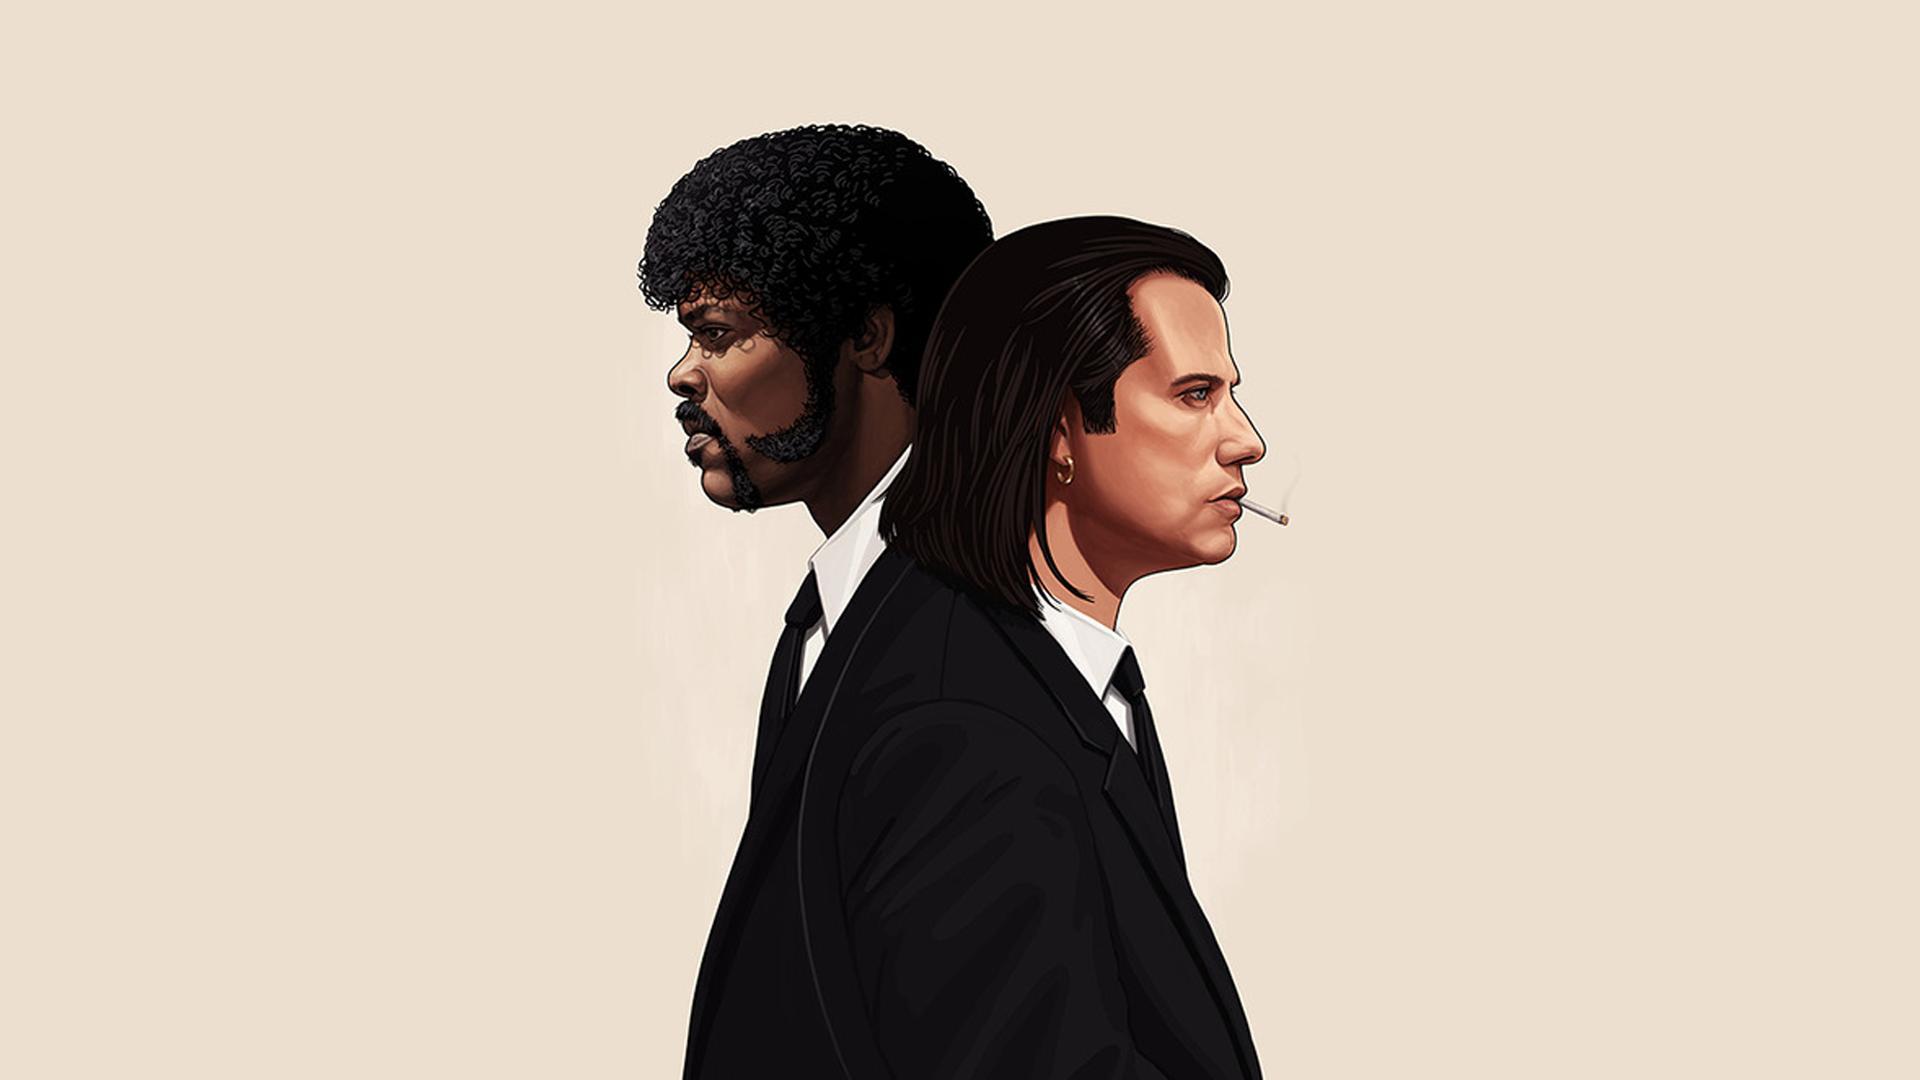 pulp fiction, movie High Definition image